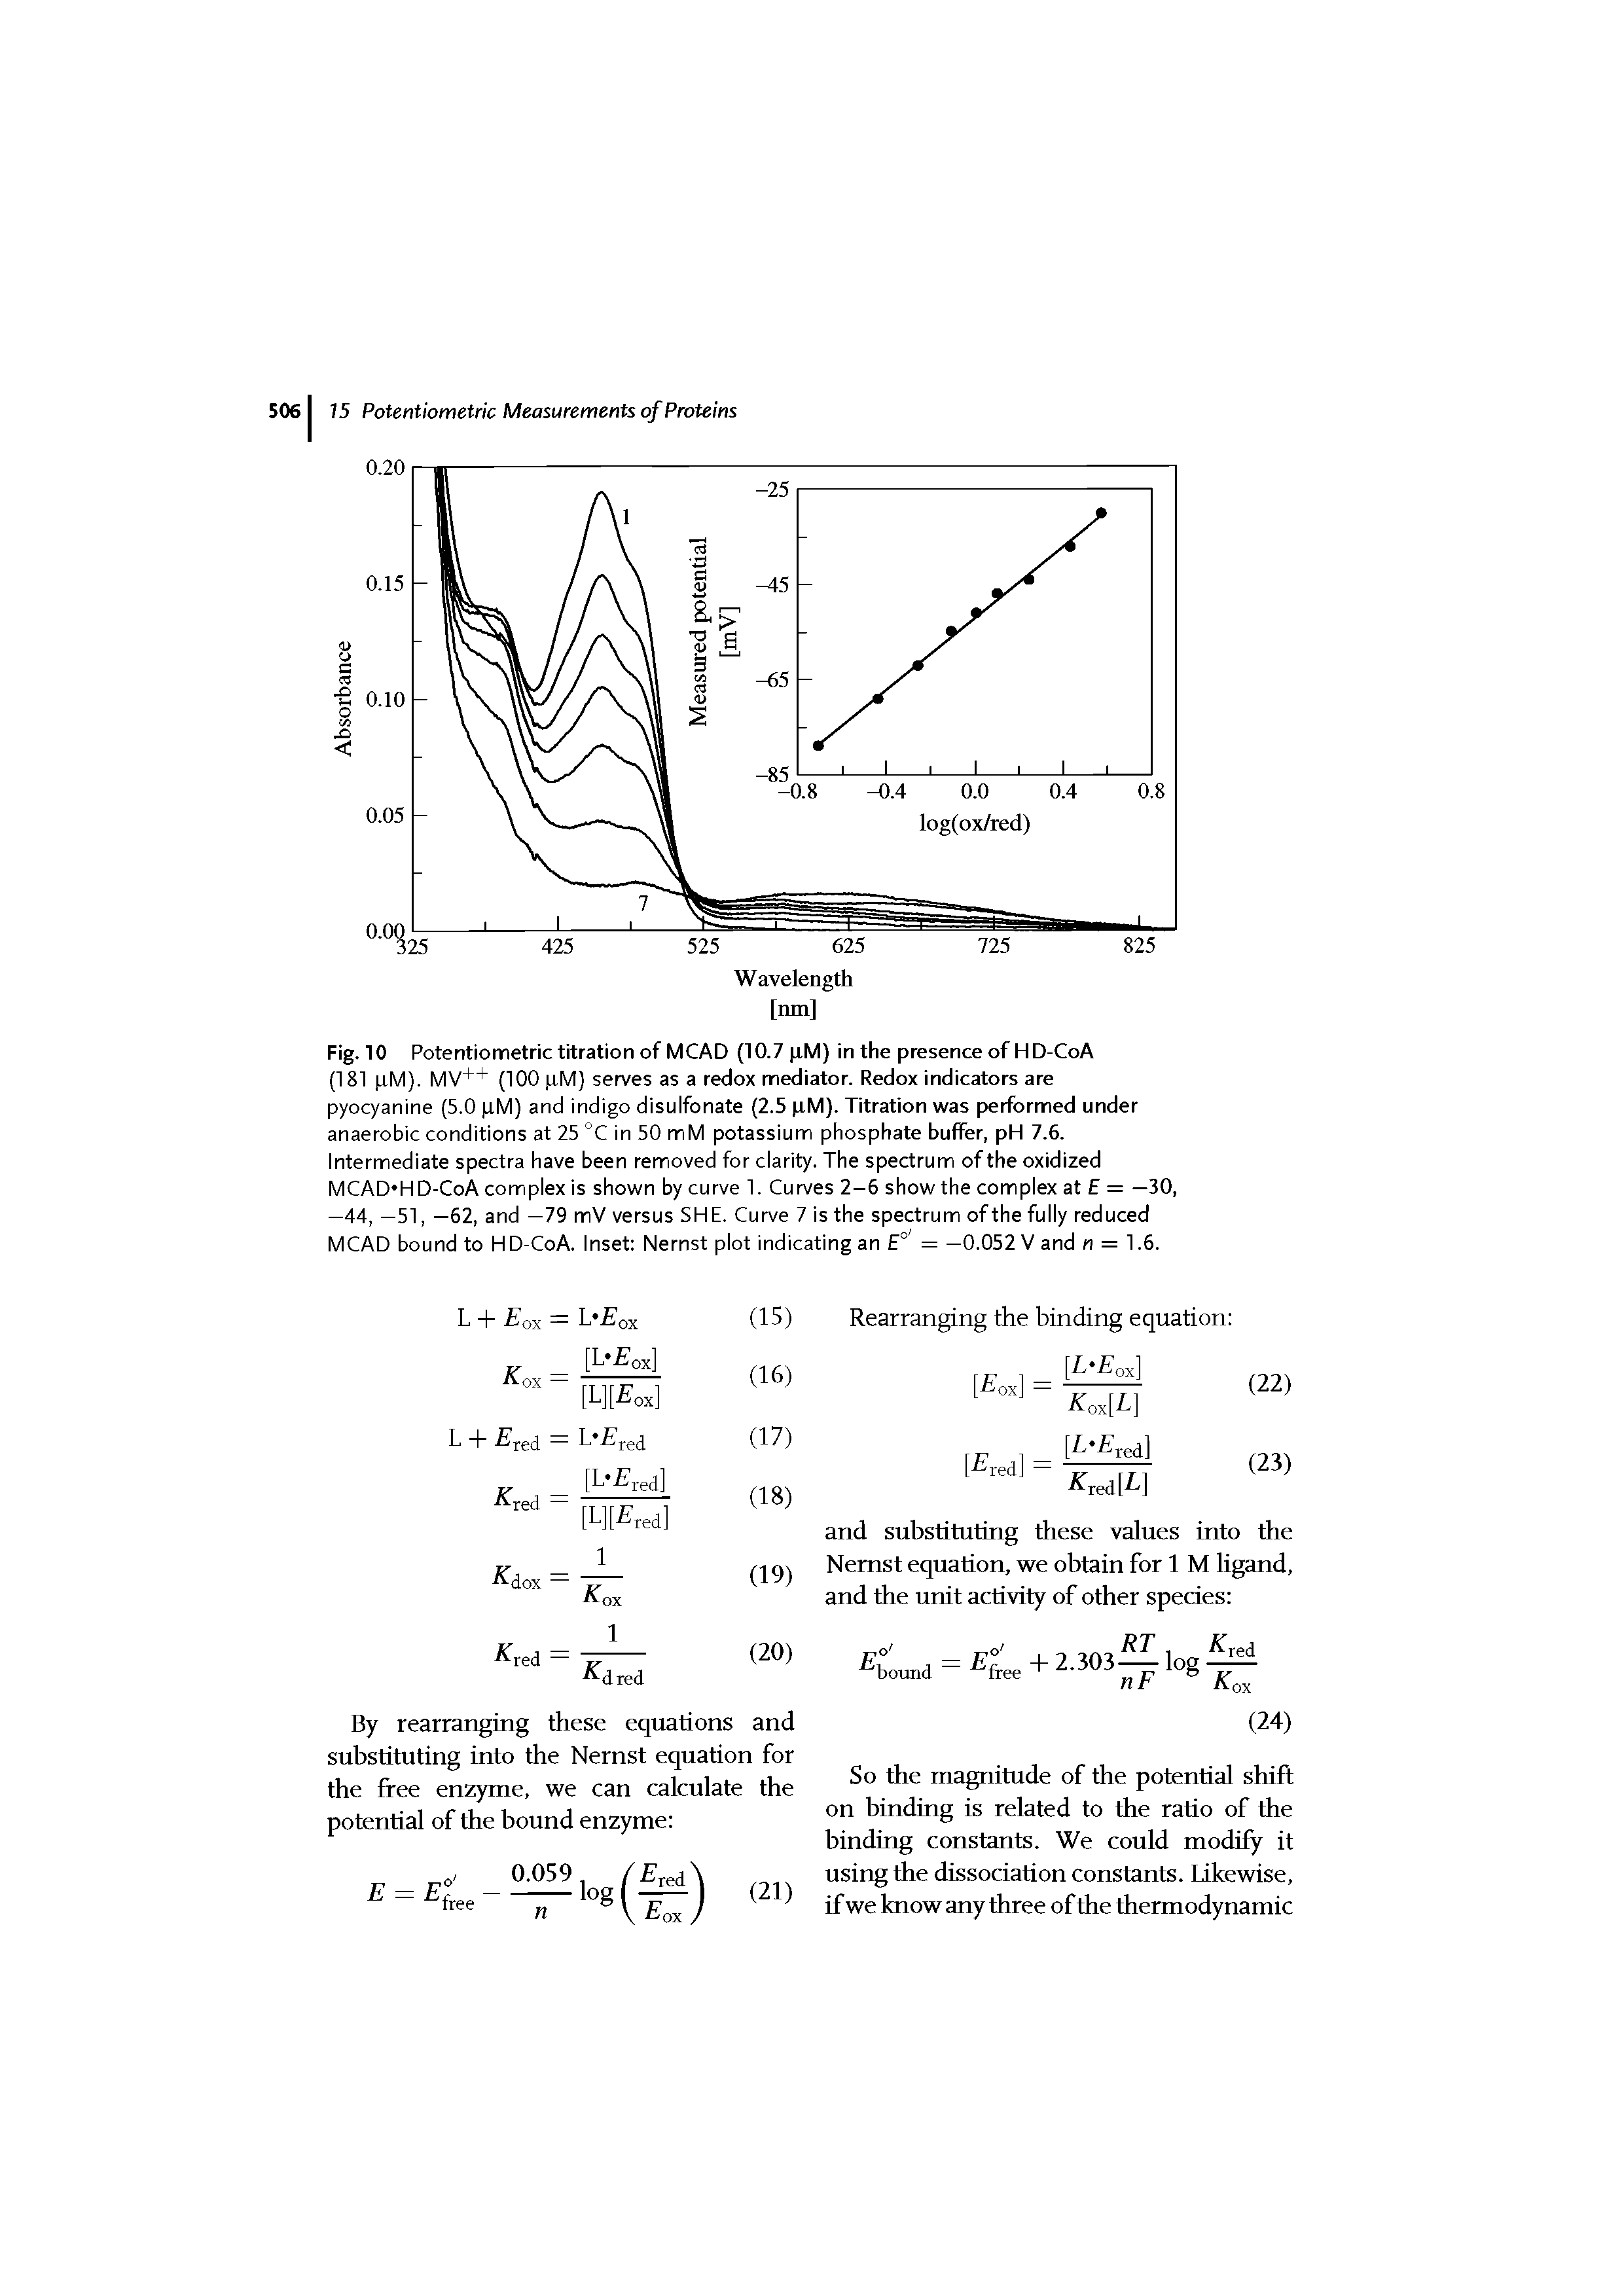 Fig.10 Potentiometric titration of MCAD (10.7 (iM) in the presence of HD-CoA (181 tM). MV++ (100 tM) serves as a redox mediator. Redox indicators are pyocyanine (5.0 pM) and indigo disulfonate (2.5 pM). Titration was performed under anaerobic conditions at 25 °C in 50 mM potassium phosphate buffer, pH 7.6. Intermediate spectra have been removed for clarity. The spectrum of the oxidized MCAD HD-CoA complex is shown by curve 1. Curves 2-6 show the complex at = —30, —44, —51, —62, and —79 mV versus SHE. Curve 7 is the spectrum of the fully reduced MCAD bound to HD-CoA. Inset Nernst plot indicating an E° = —0.052 V and n = 1.6.